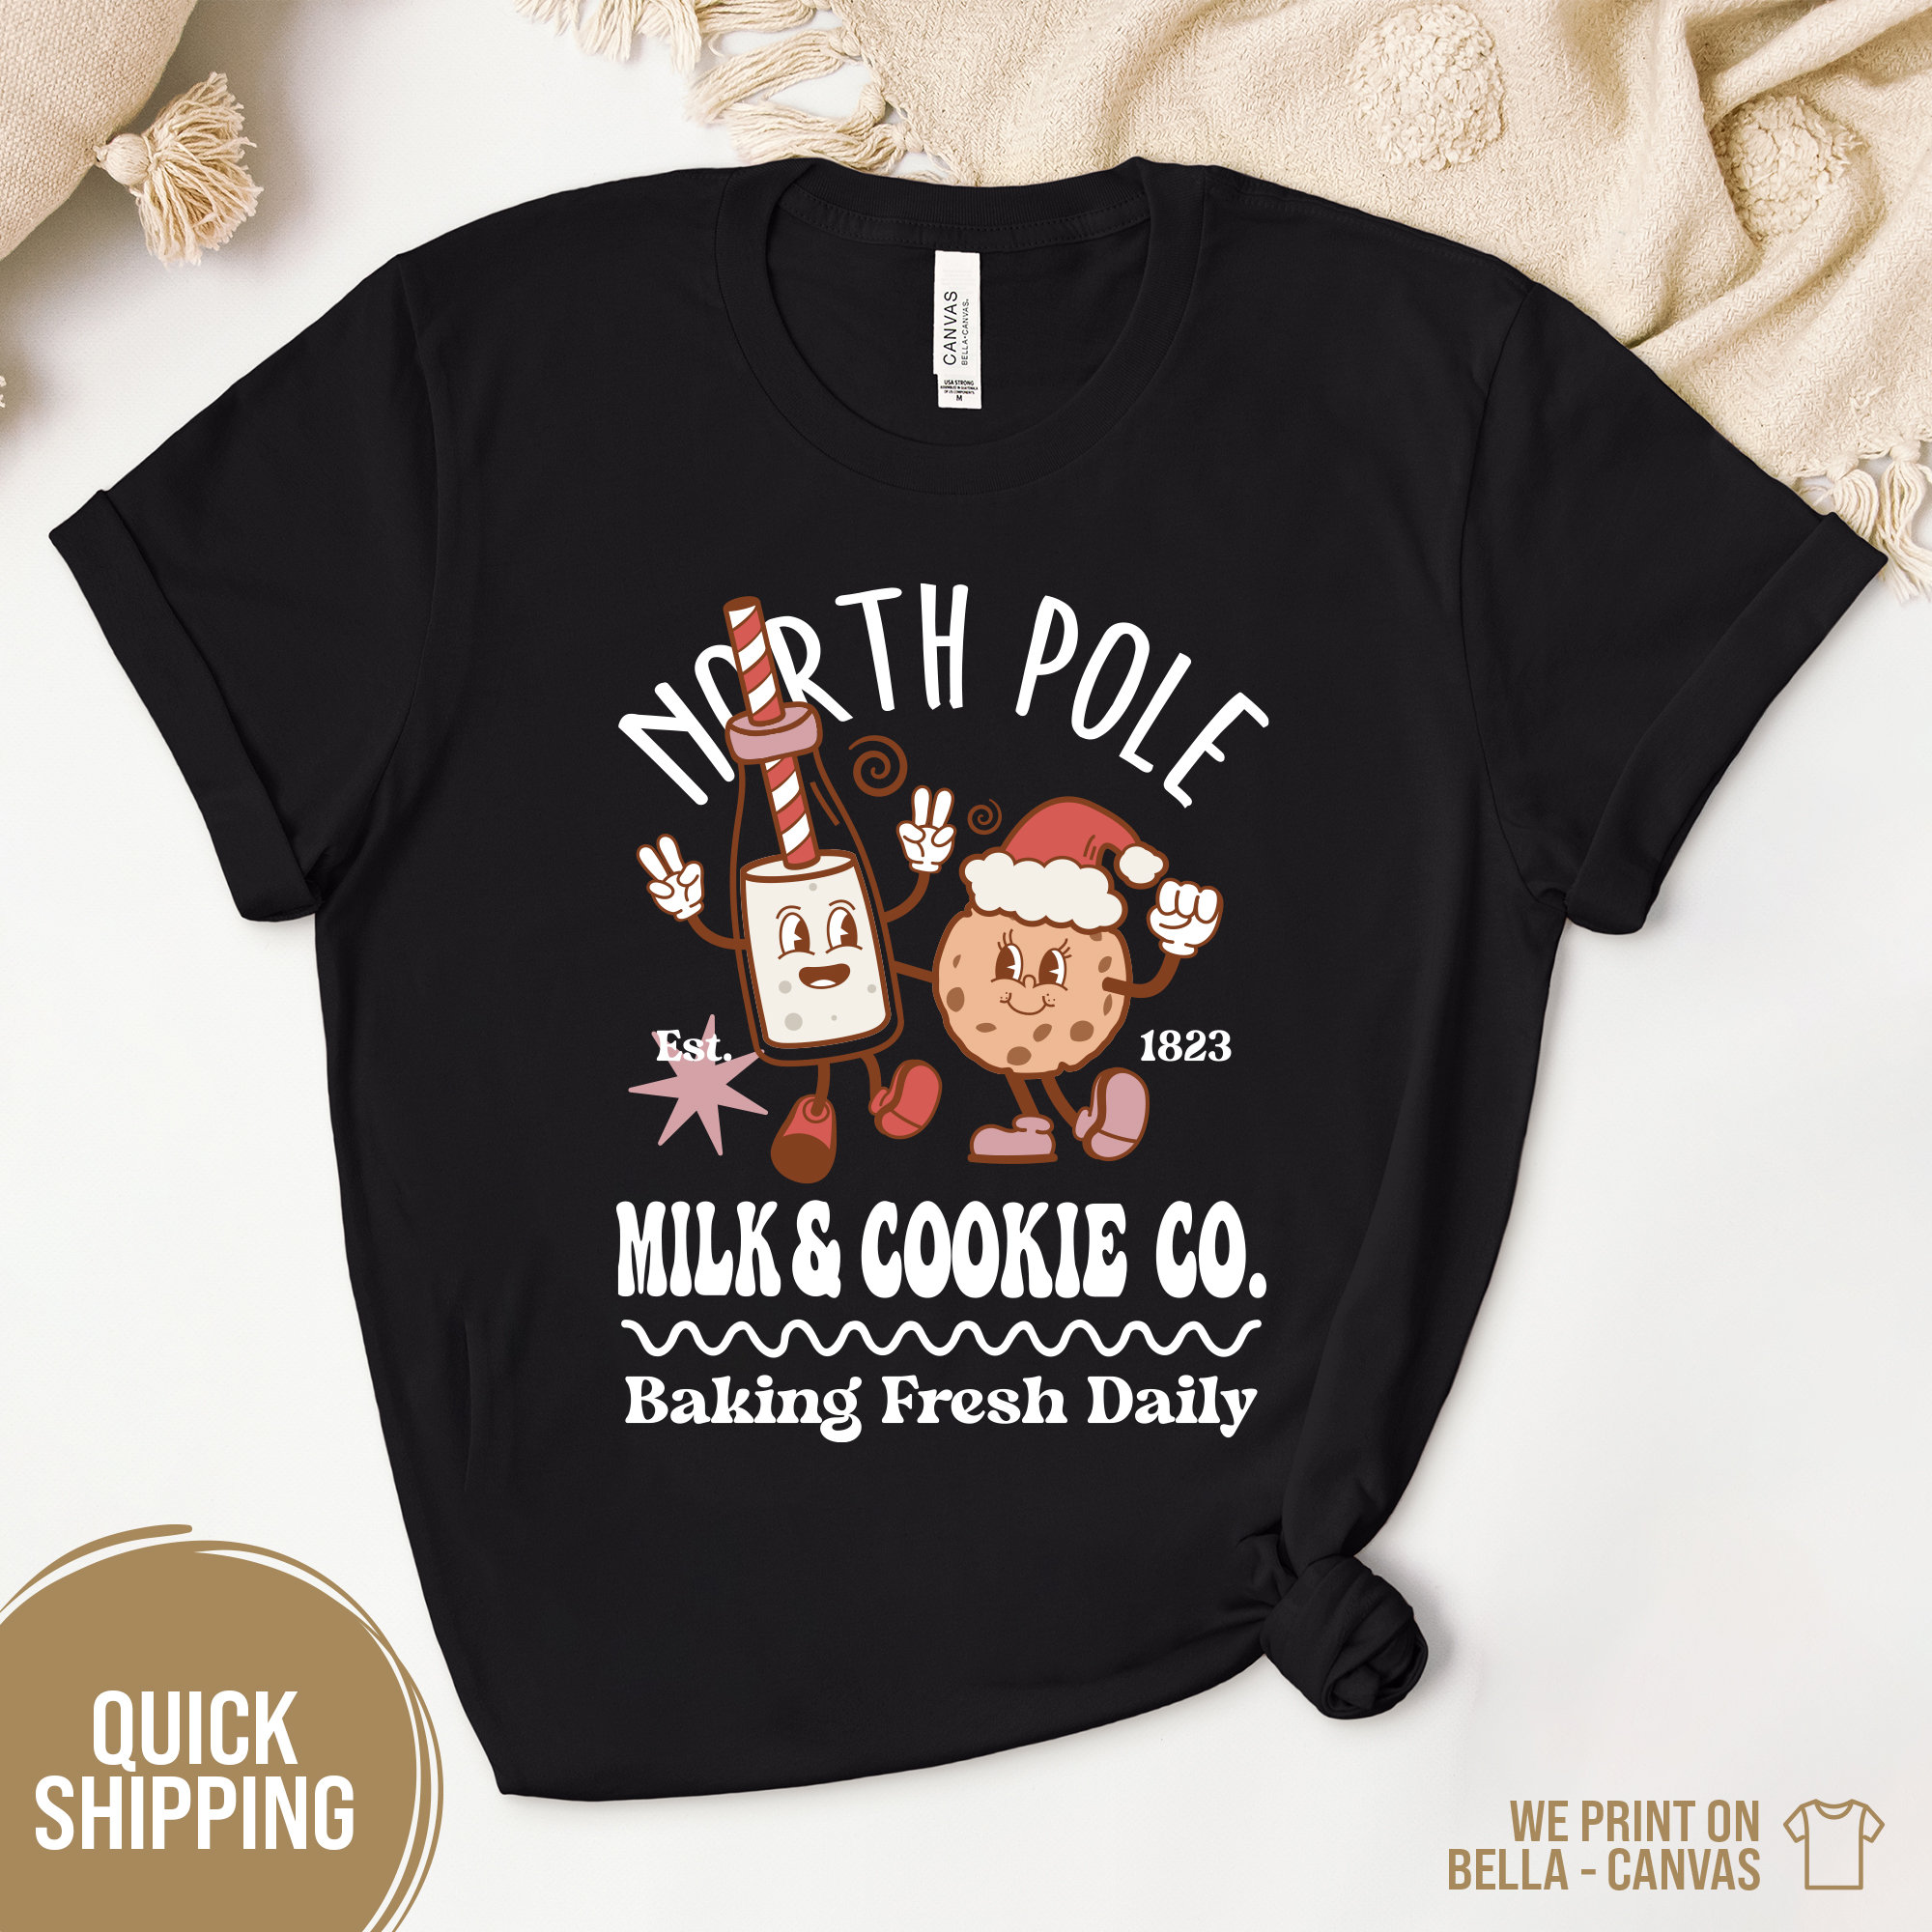 Festive Y2K Clothing: Cute Christmas Baking Shirt with North Pole Milk and Cookie Co Santa Design